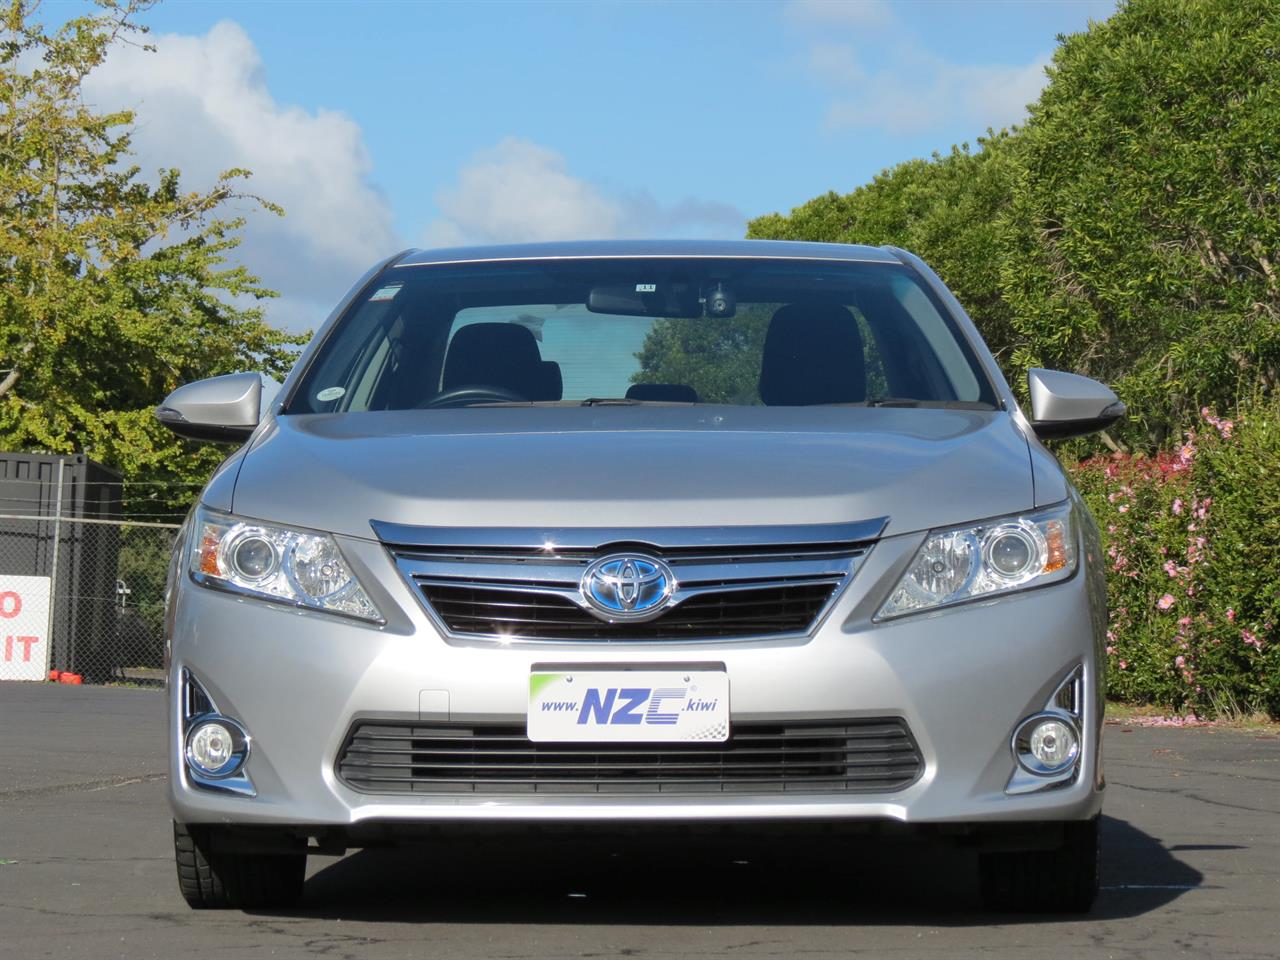 2012 Toyota Camry only $51 weekly